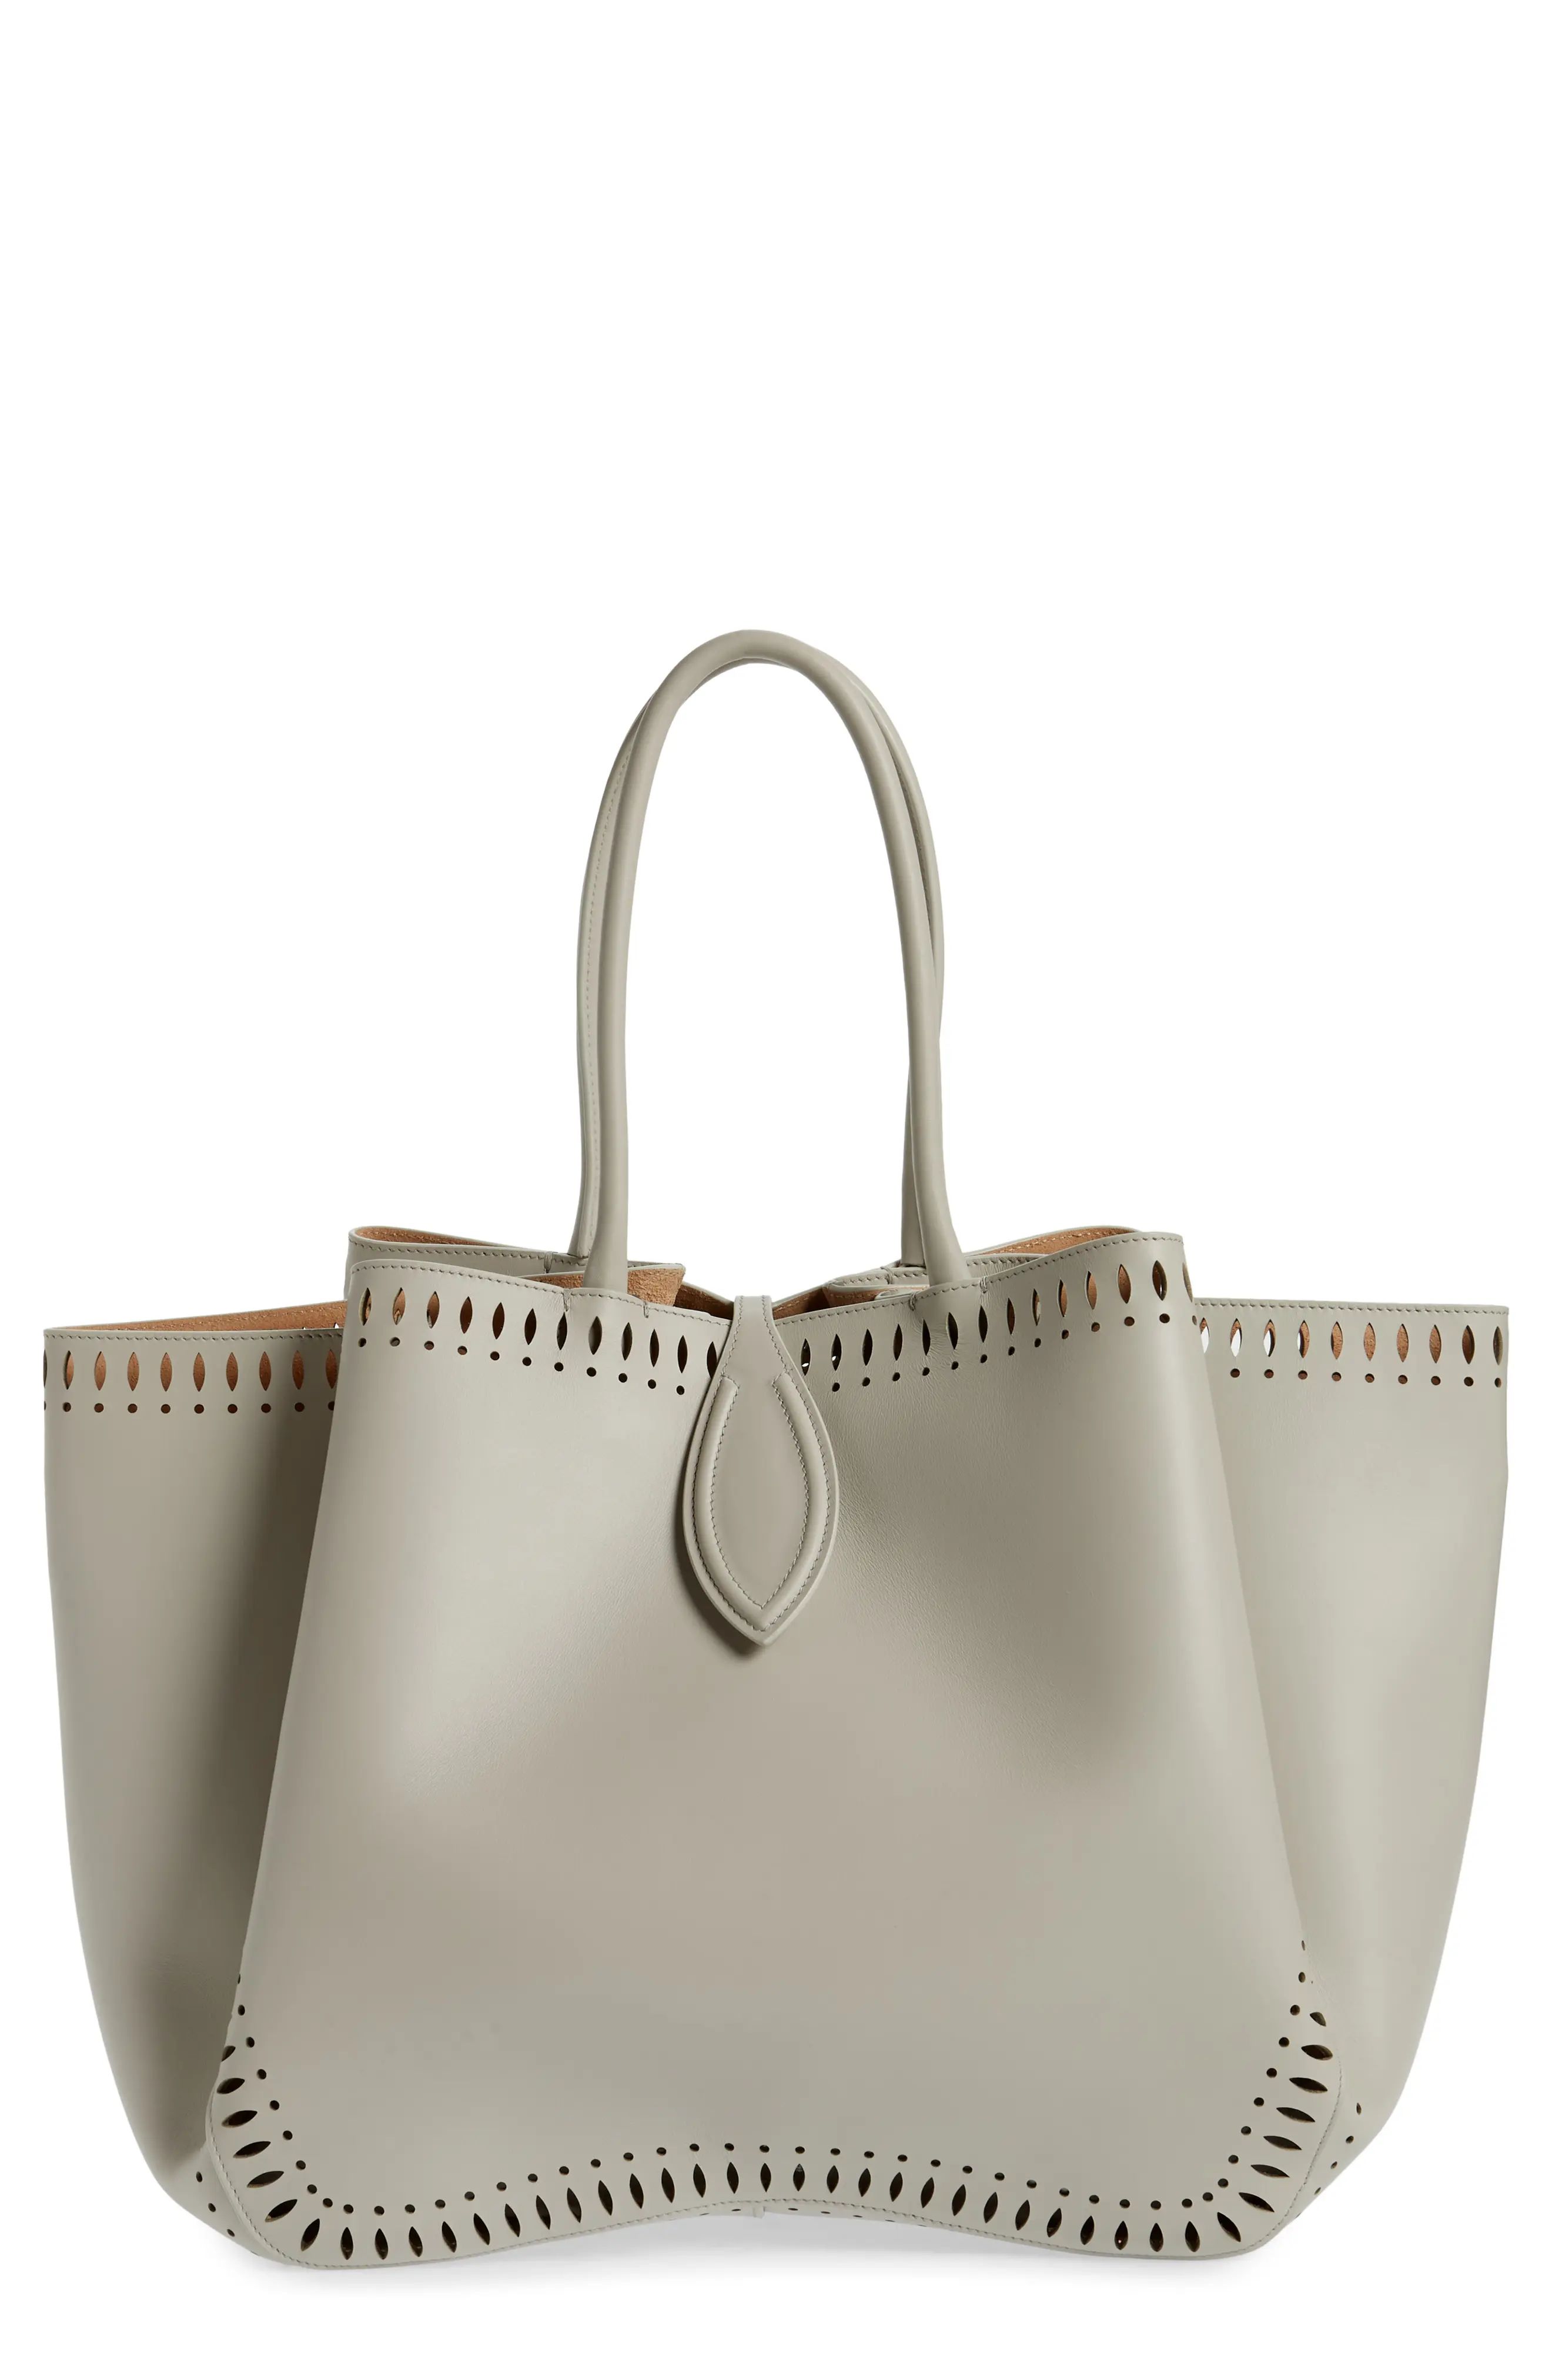 Alaia Angele 20 Leather Top Handle Bag in Perle at Nordstrom | Nordstrom